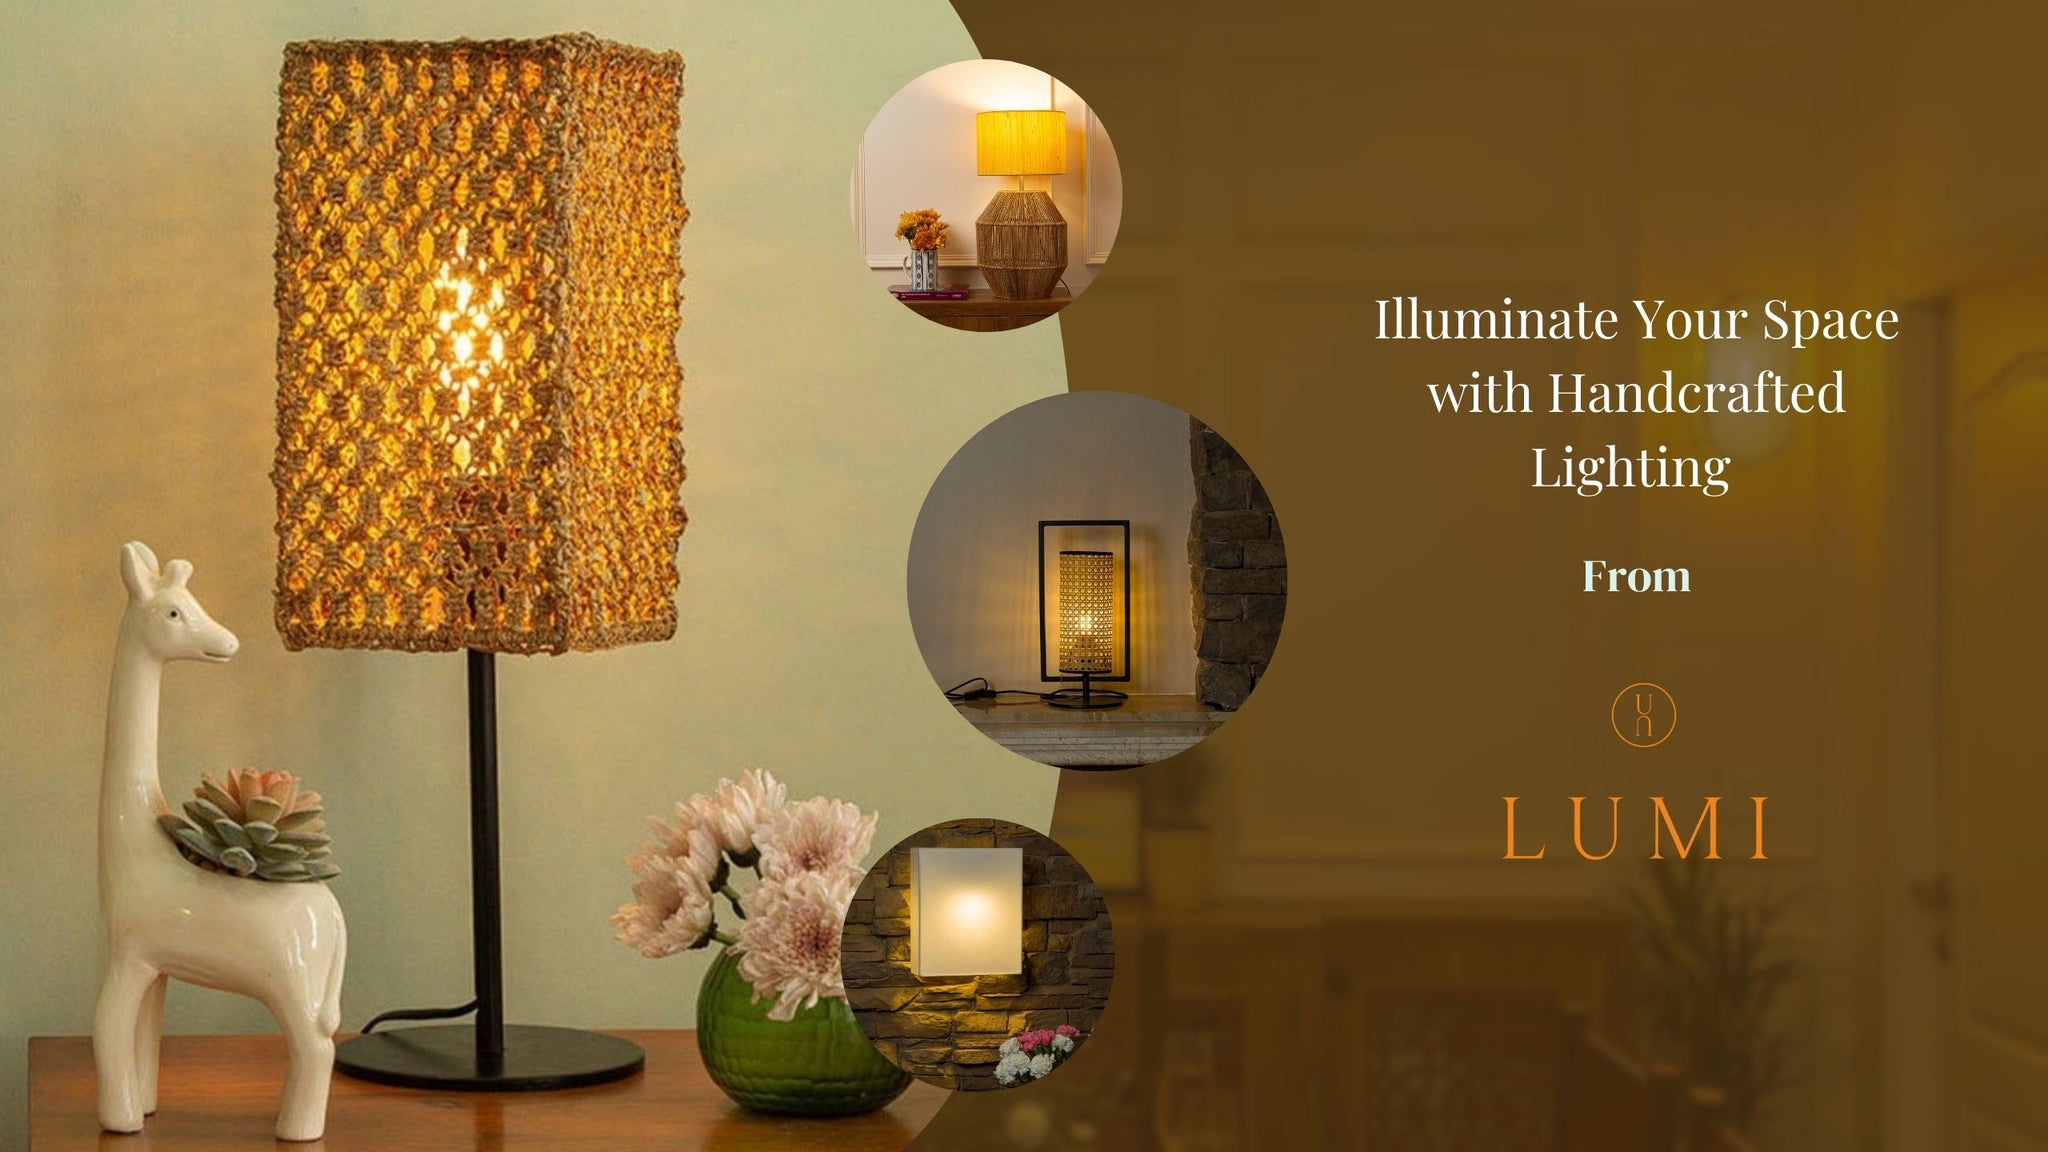 Illuminate Your Space with Handcrafted Lighting from Lumi Shop